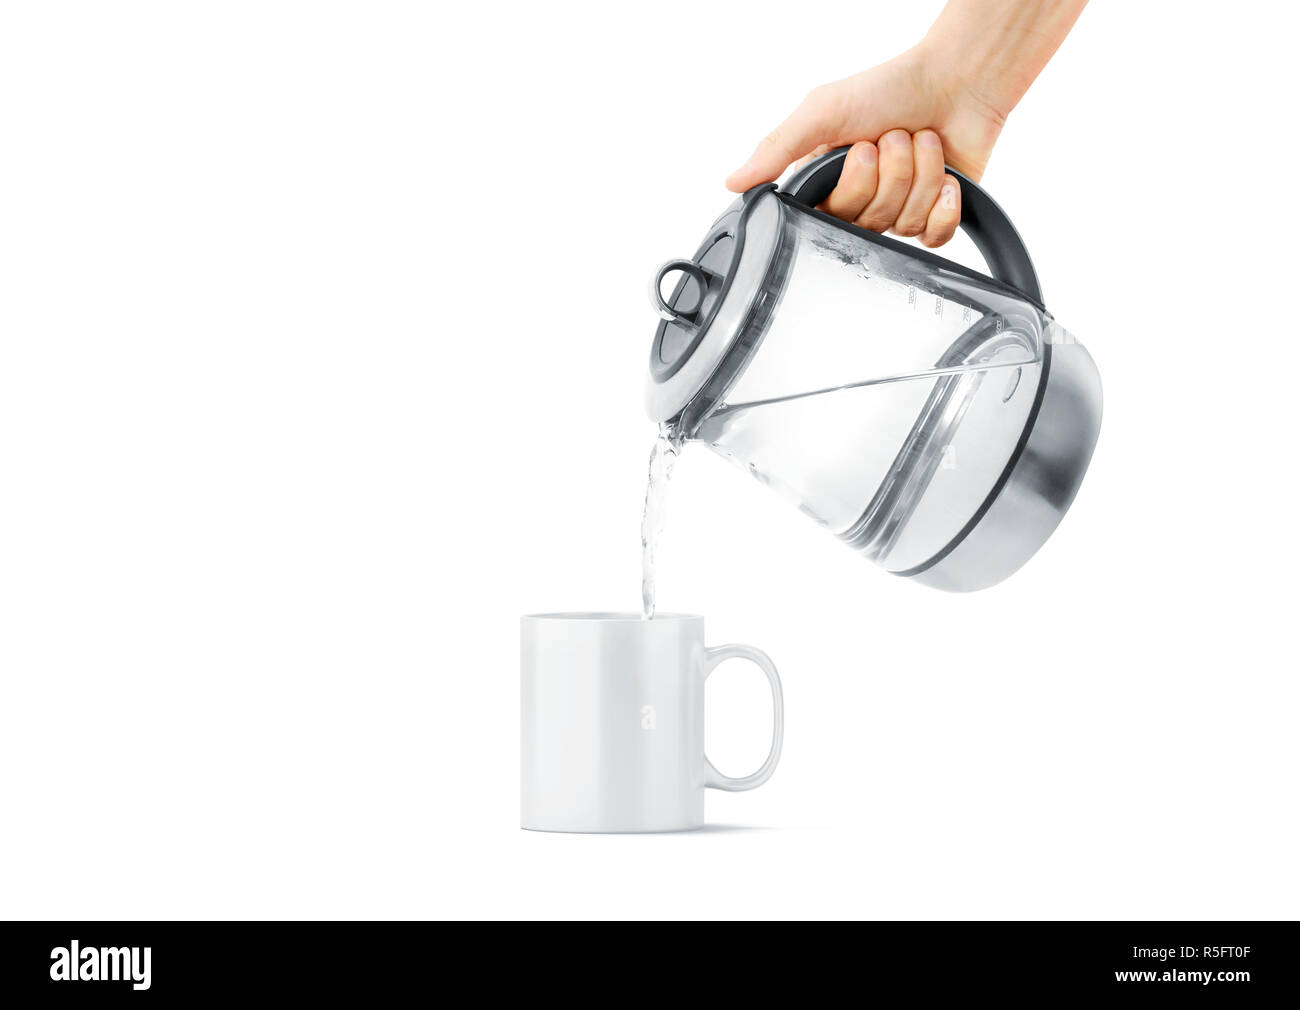 Blank white ceramic mug with hot teapot mock up, isolated, front view. Clear drink cup with teakettle mockup. Sensitive kitchen utensil in arm template. Brew beverage in thermal crockery. Stock Photo